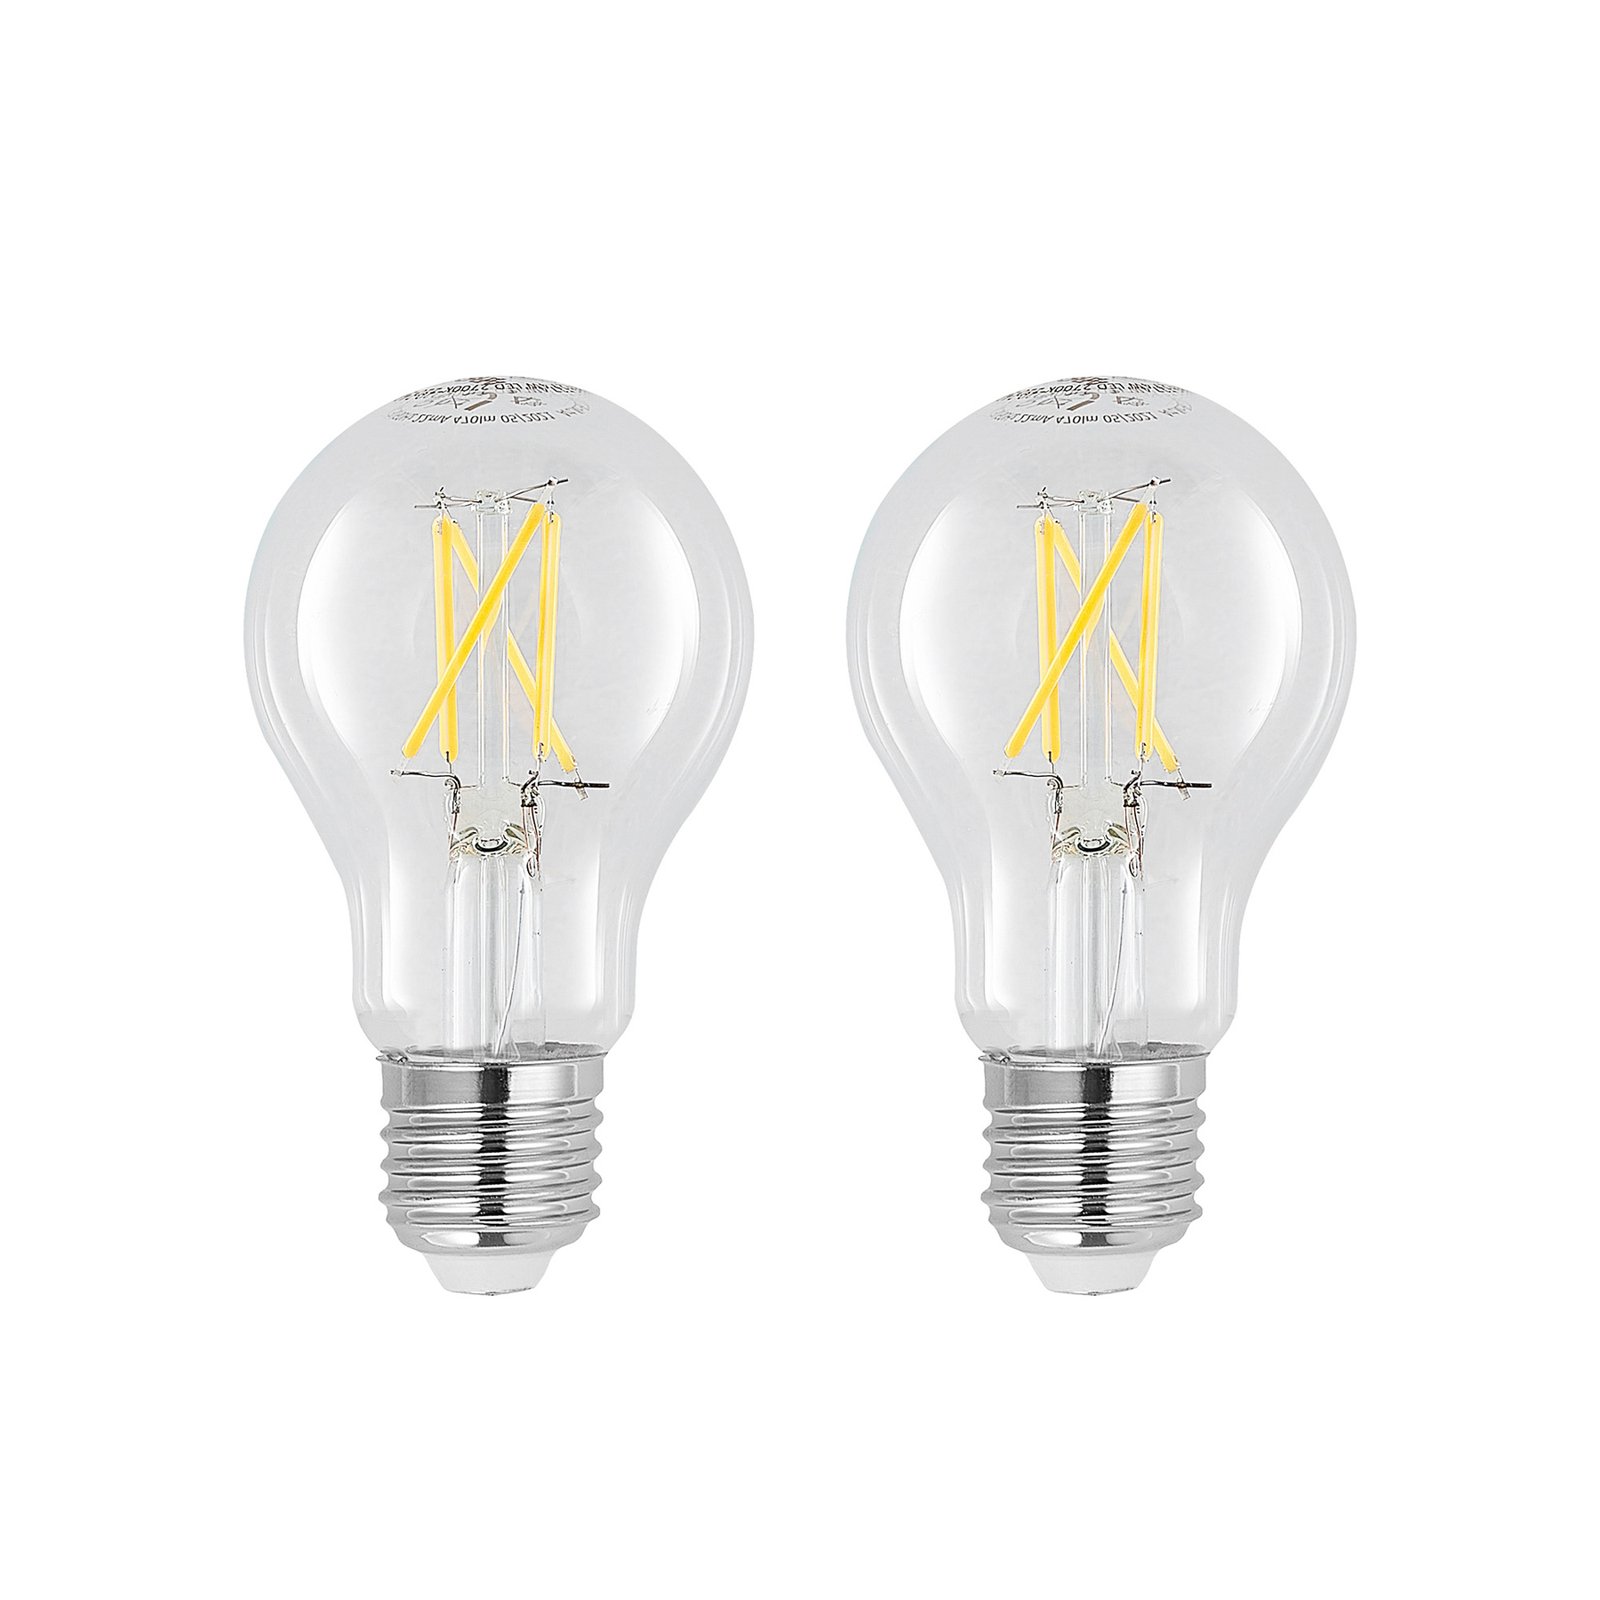 LED bulb E27 6W 2,700K filament, dimmable clear 2x